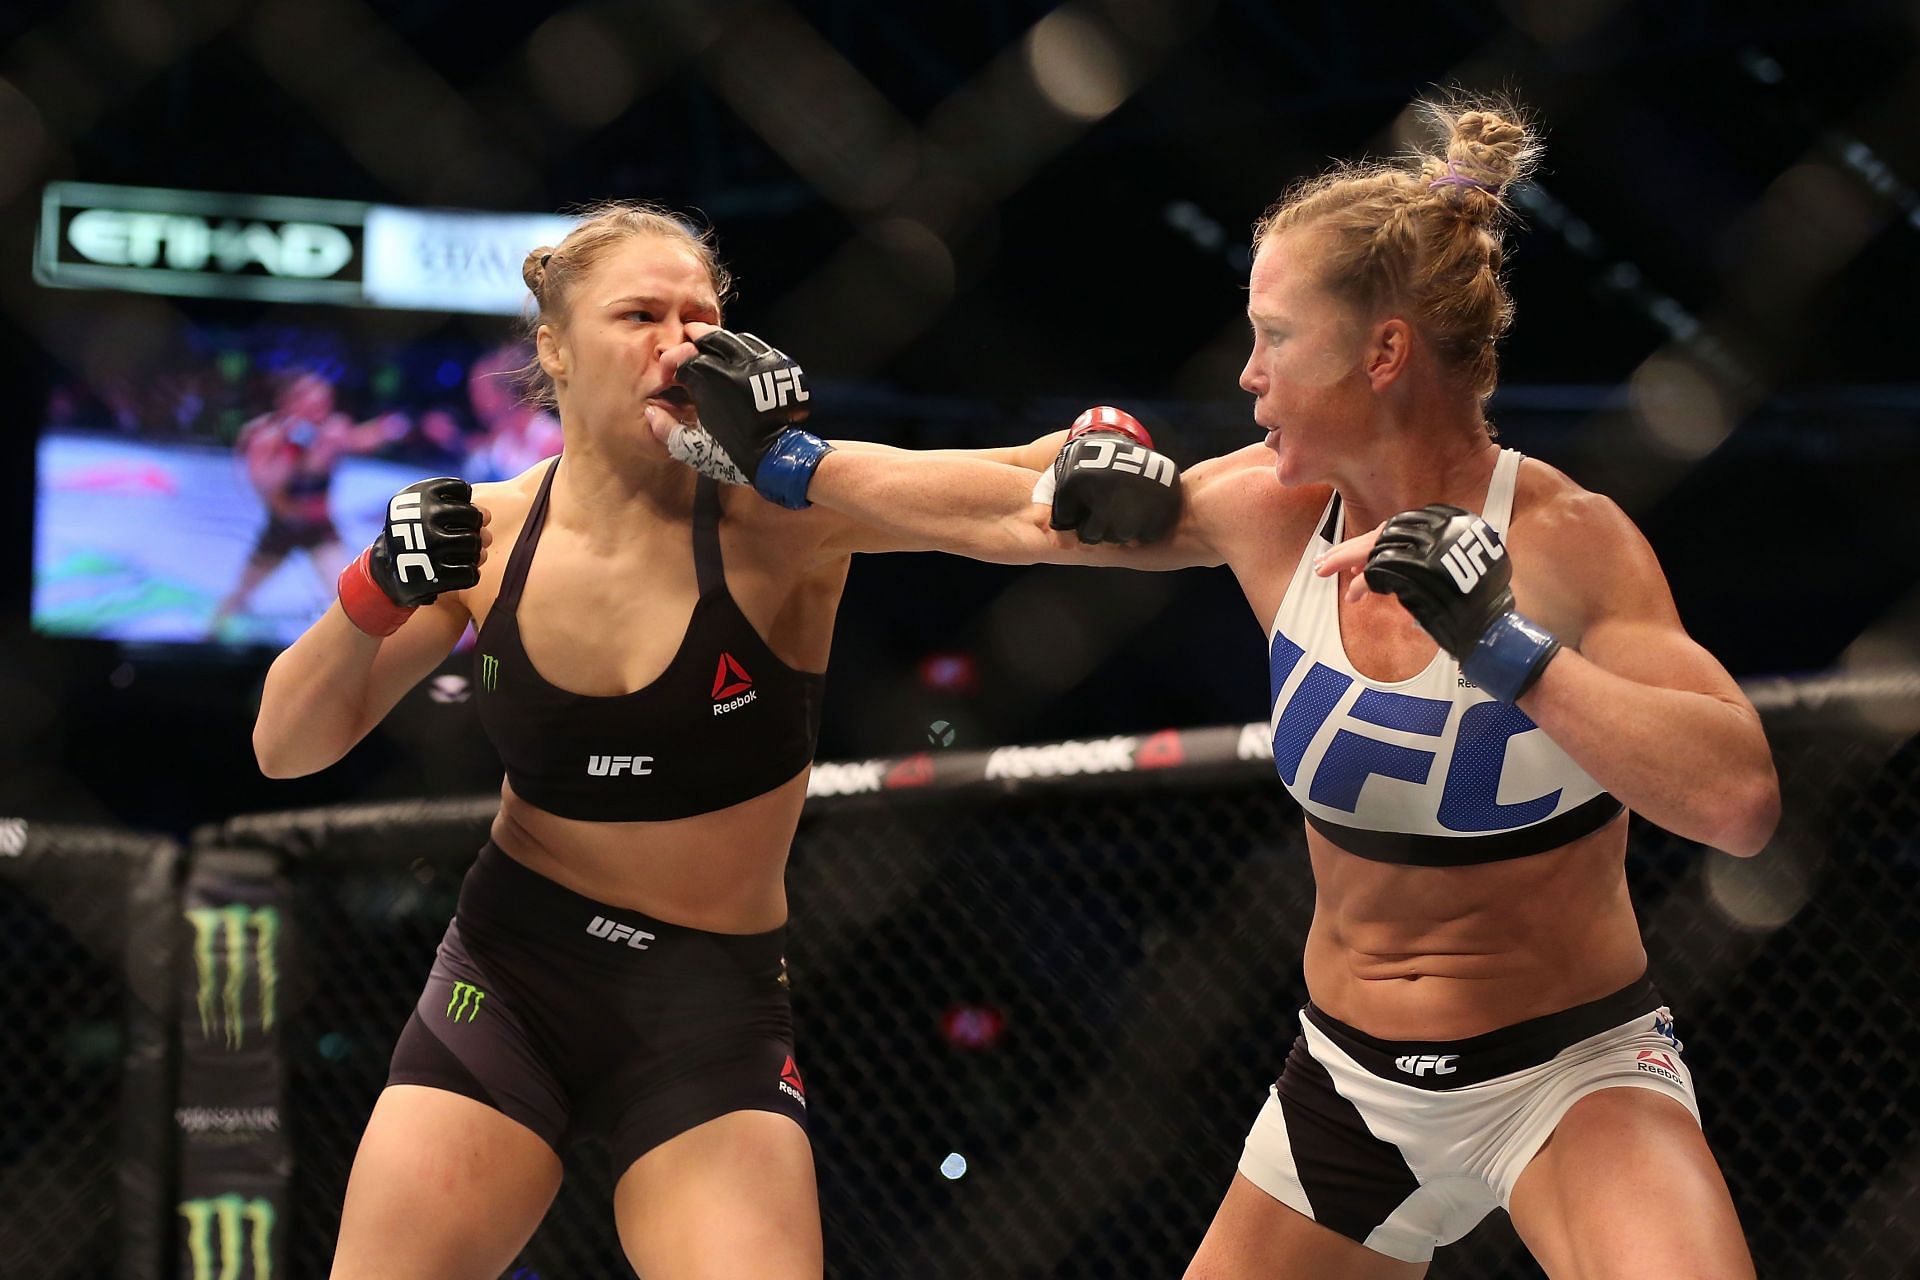 Ronda Rousey was in a bad place after loss to Holly Holm